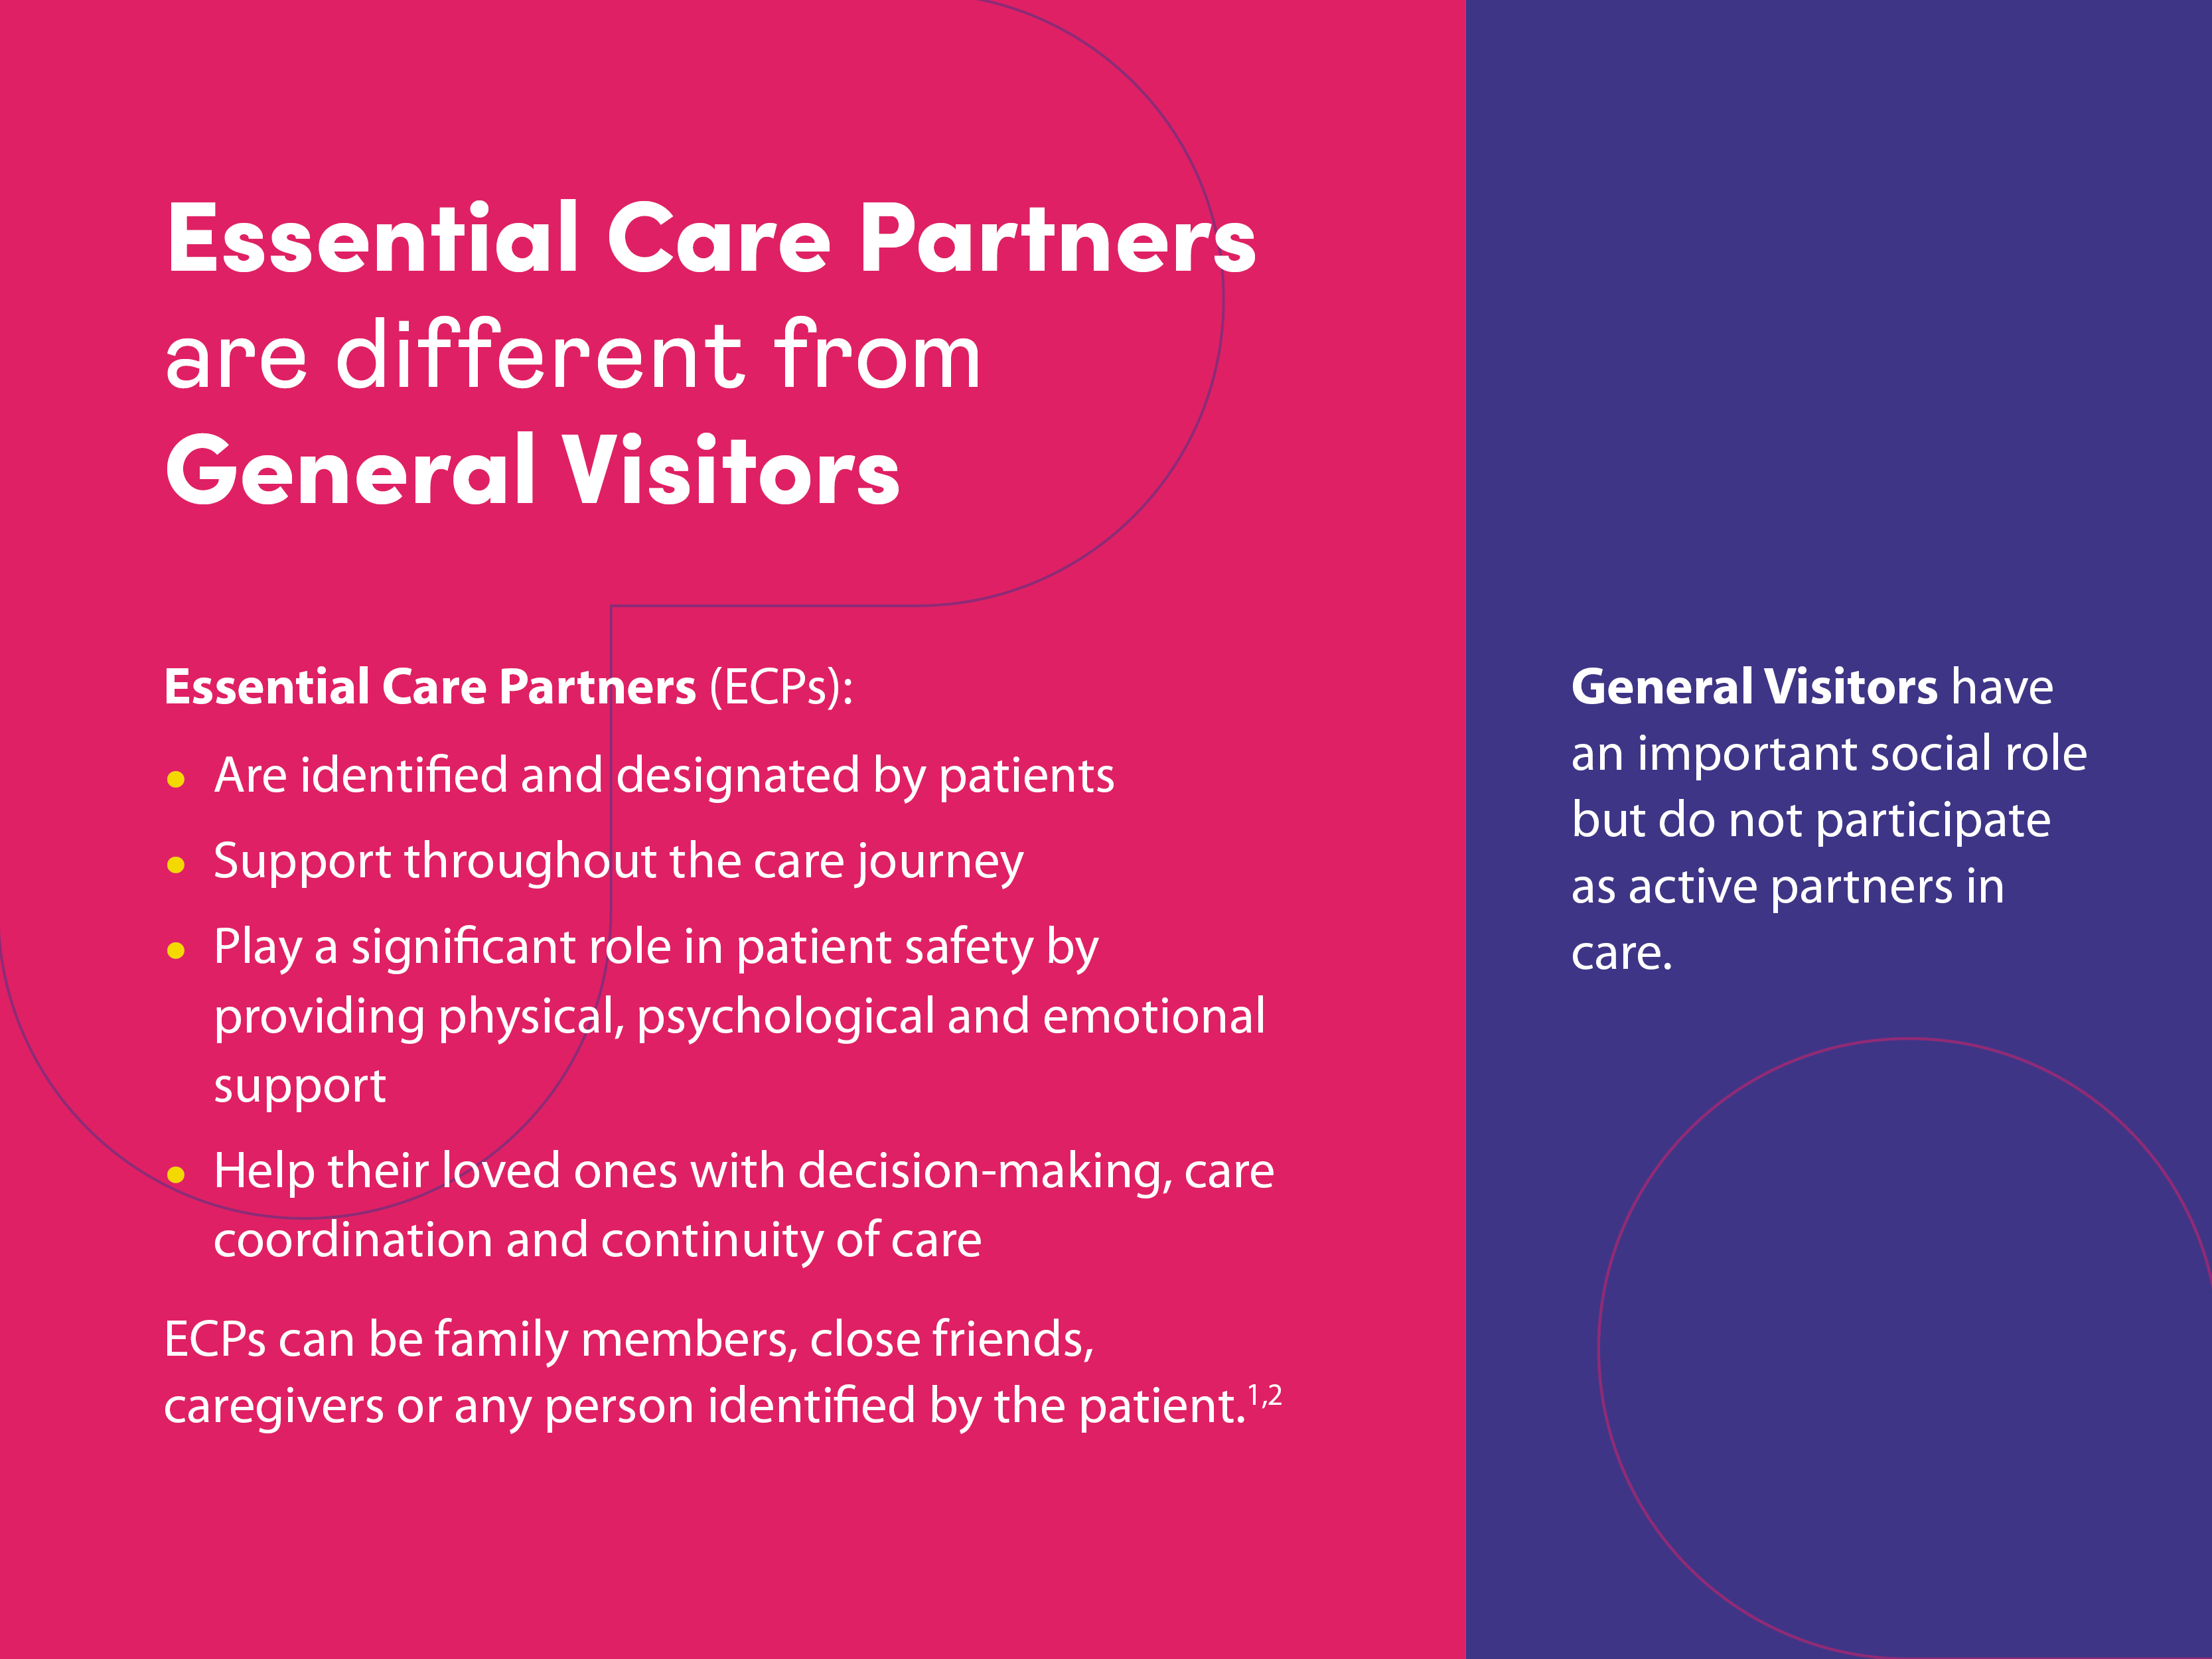 Essential Care Partners    are different from   General Visitors      Essential Care Partners (ECPs):   Are identified and designated by patients   Support throughout the care journey   Play a significant role in patient safety by providing physical, psychological and emotional support   Help their loved ones with decision-making, care coordination and continuity of care      ECPs can be family members, close friends, caregivers or any person identified by the patient   General Visitors have an important role but do not participate as active partners in care.